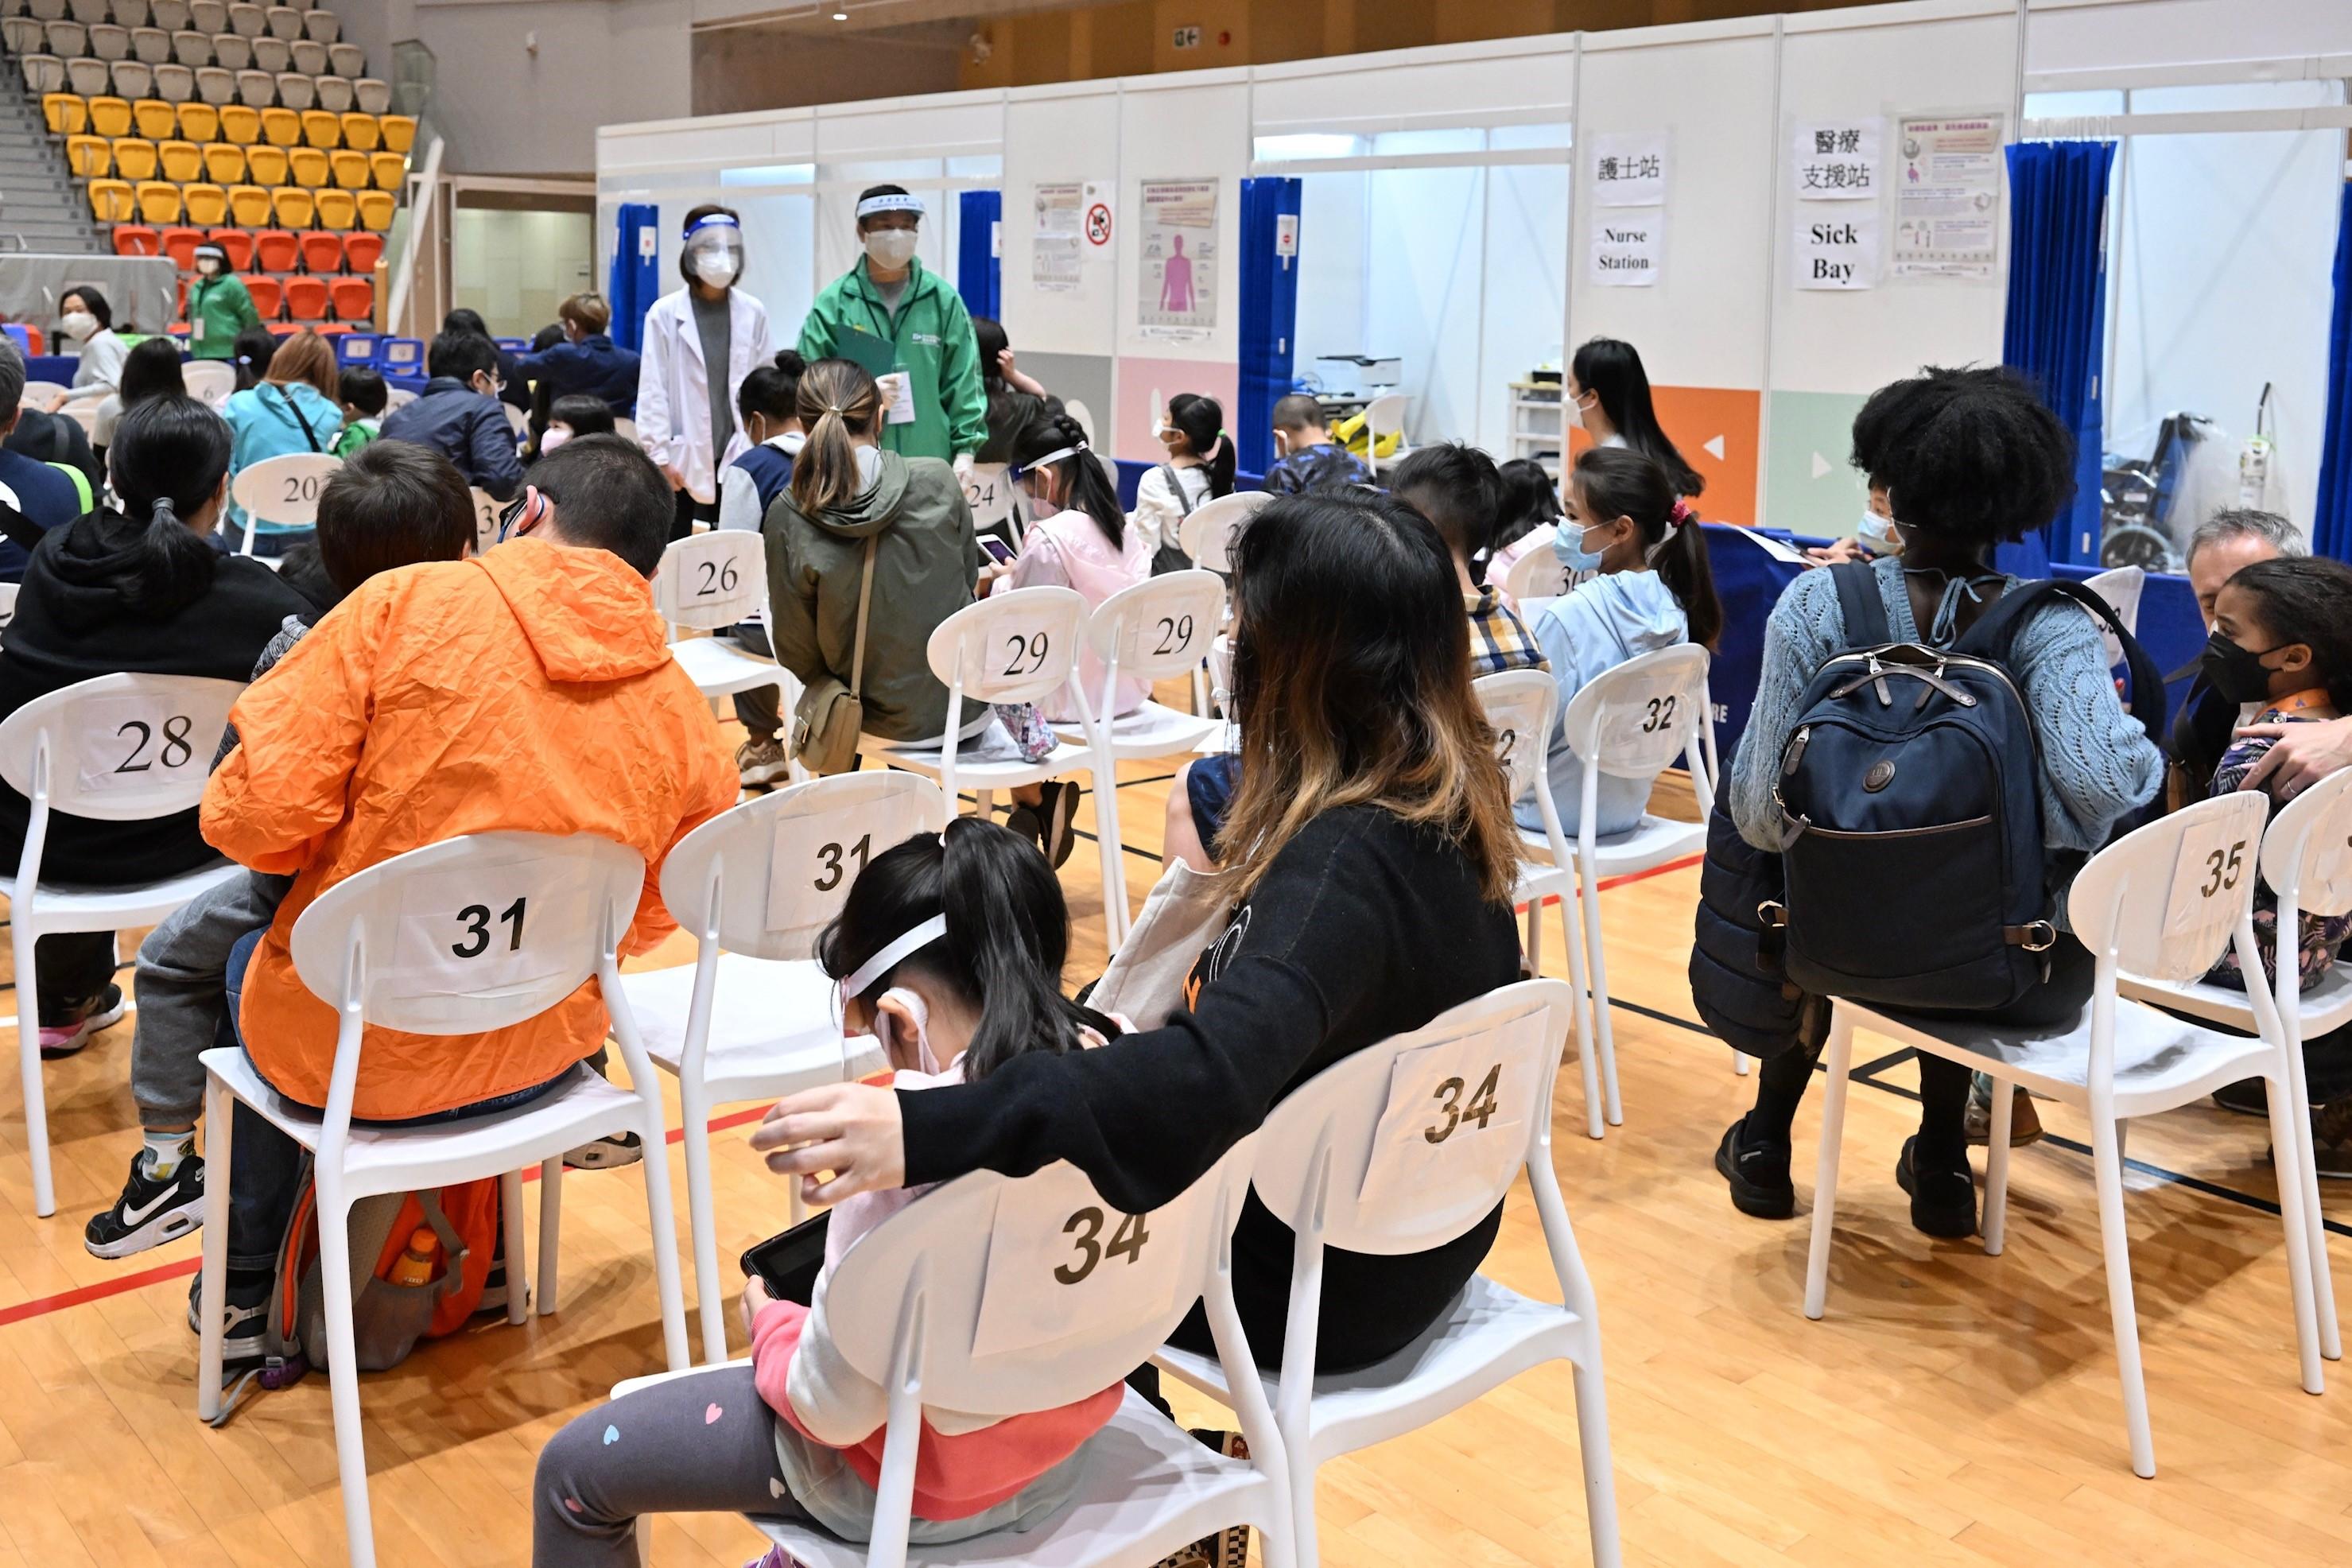 The Children Community Vaccination Centre at Tsuen Wan Sports Centre came into operation today (March 4) to provide the BioNTech vaccination service to children aged 5 to 11. Photo shows children and their parents/guardians at the waiting area for vaccination.